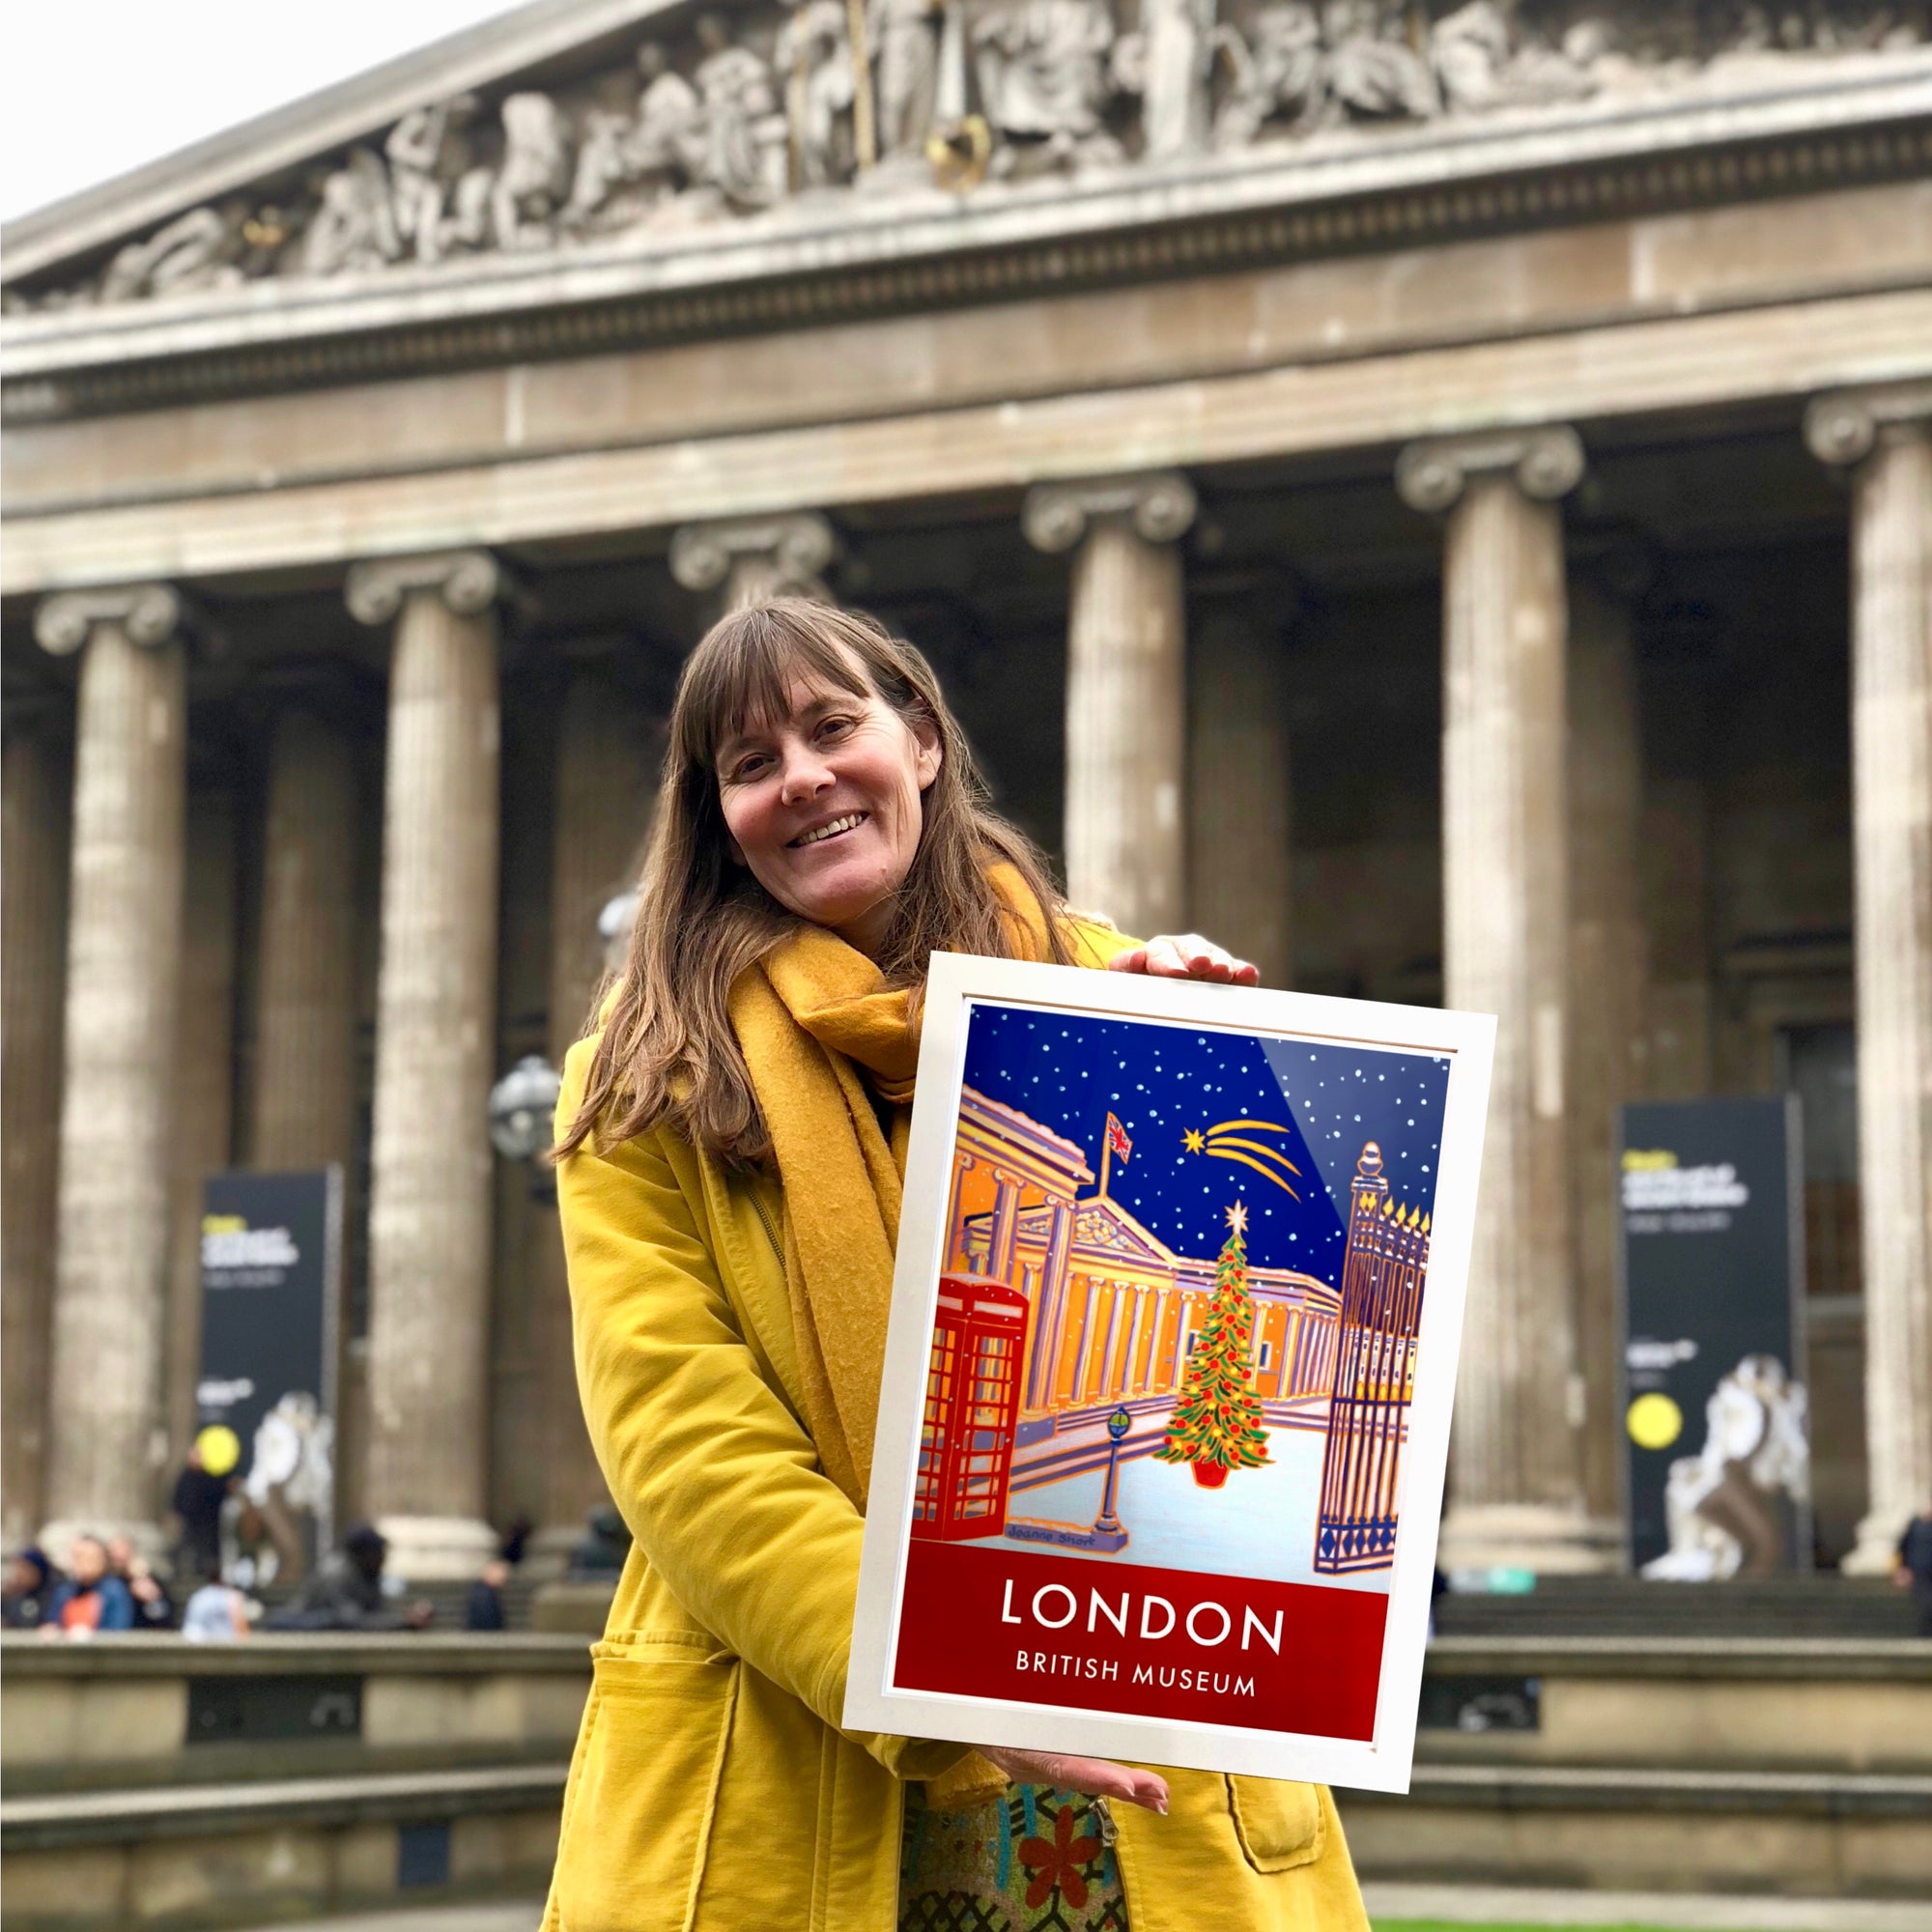 Artist Joanne Short outside the British Museum in London holding one of her new art prints of the museum which forms part of the new range of licensed art products featuring Joanne Short's art.